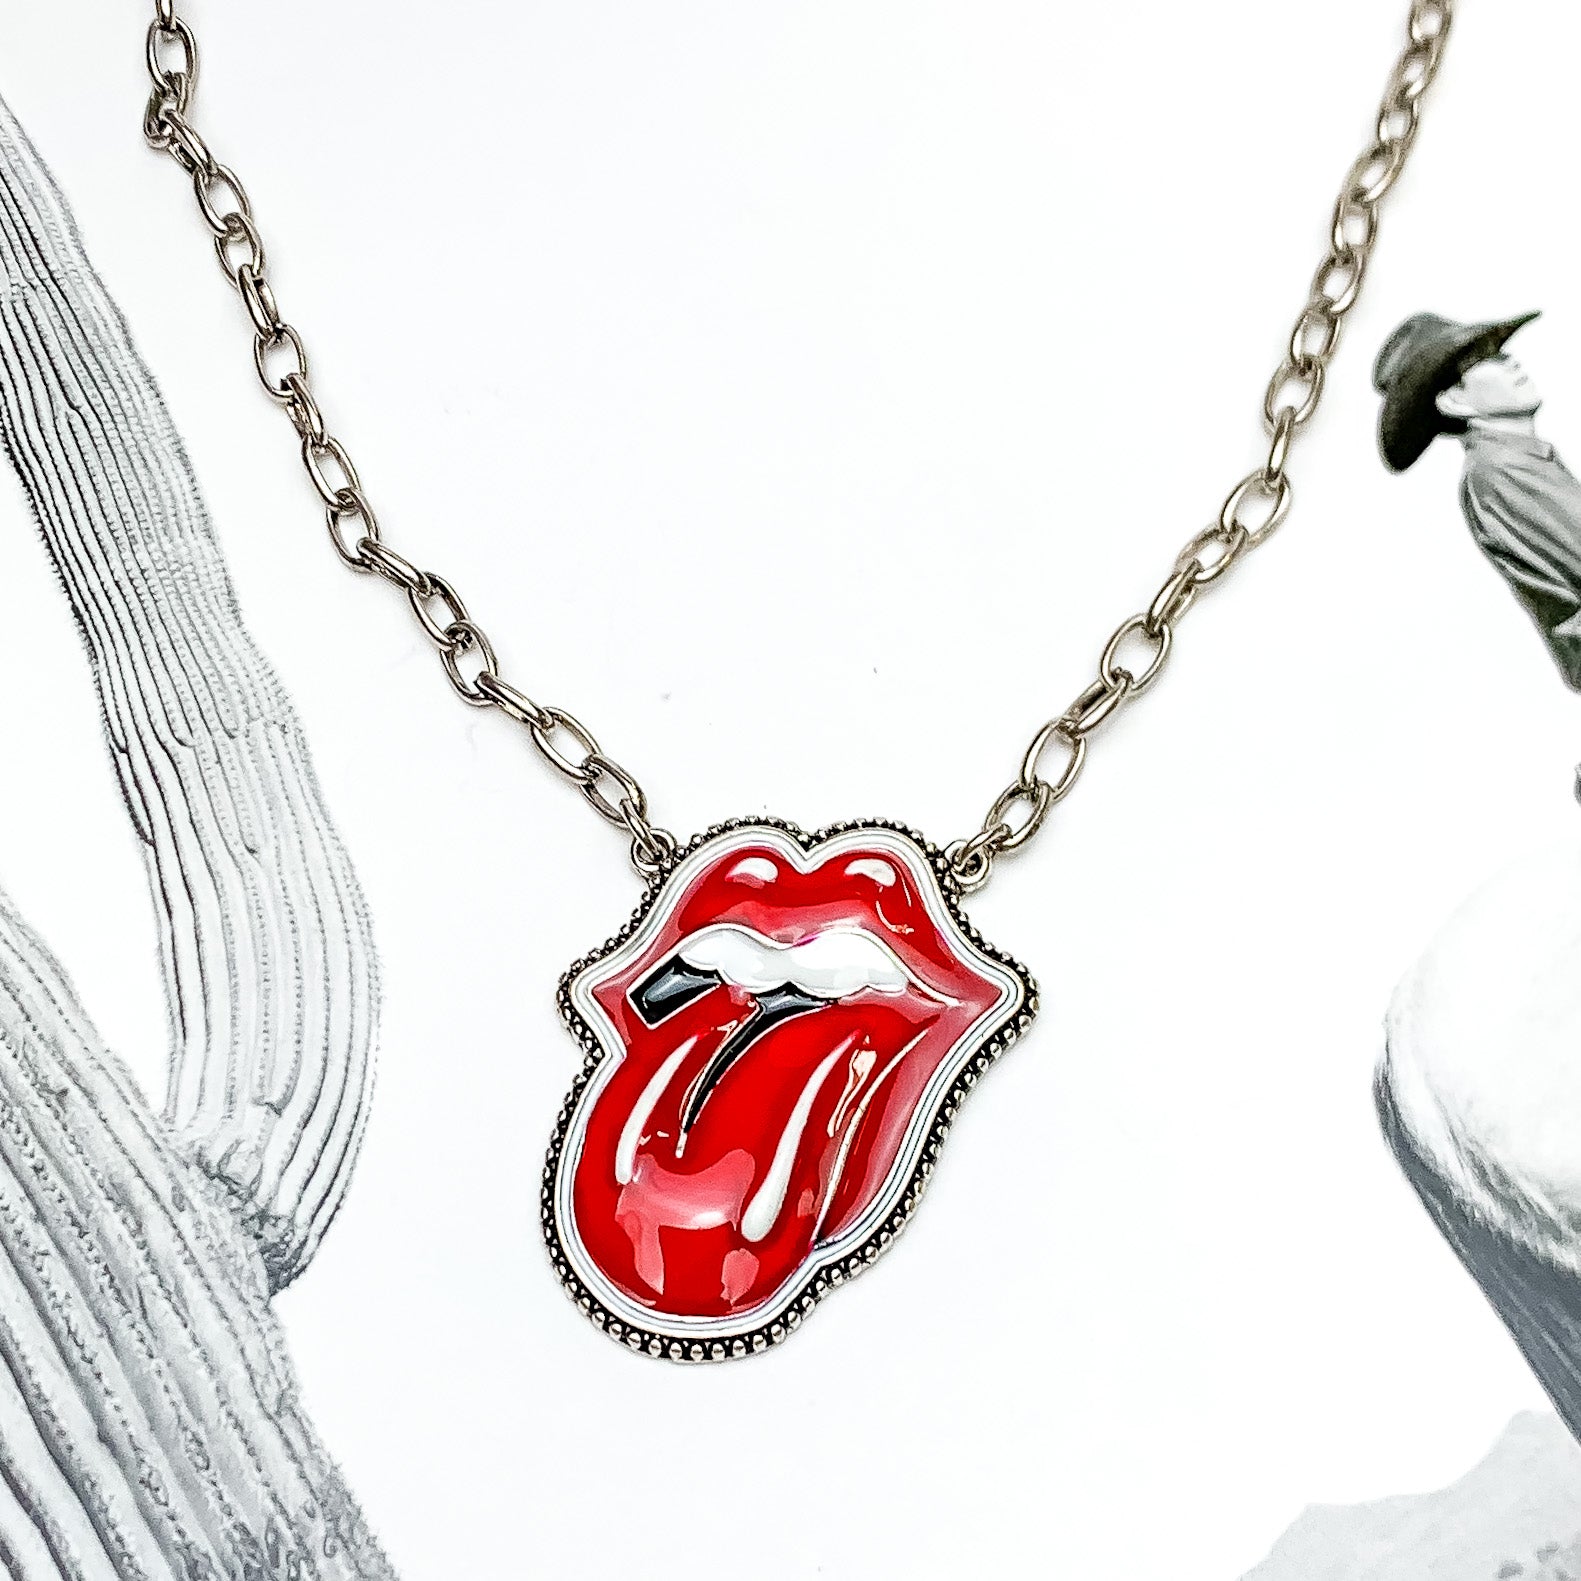 Bold Red Tongue Pendent on Silver Tone Necklace - Giddy Up Glamour Boutique